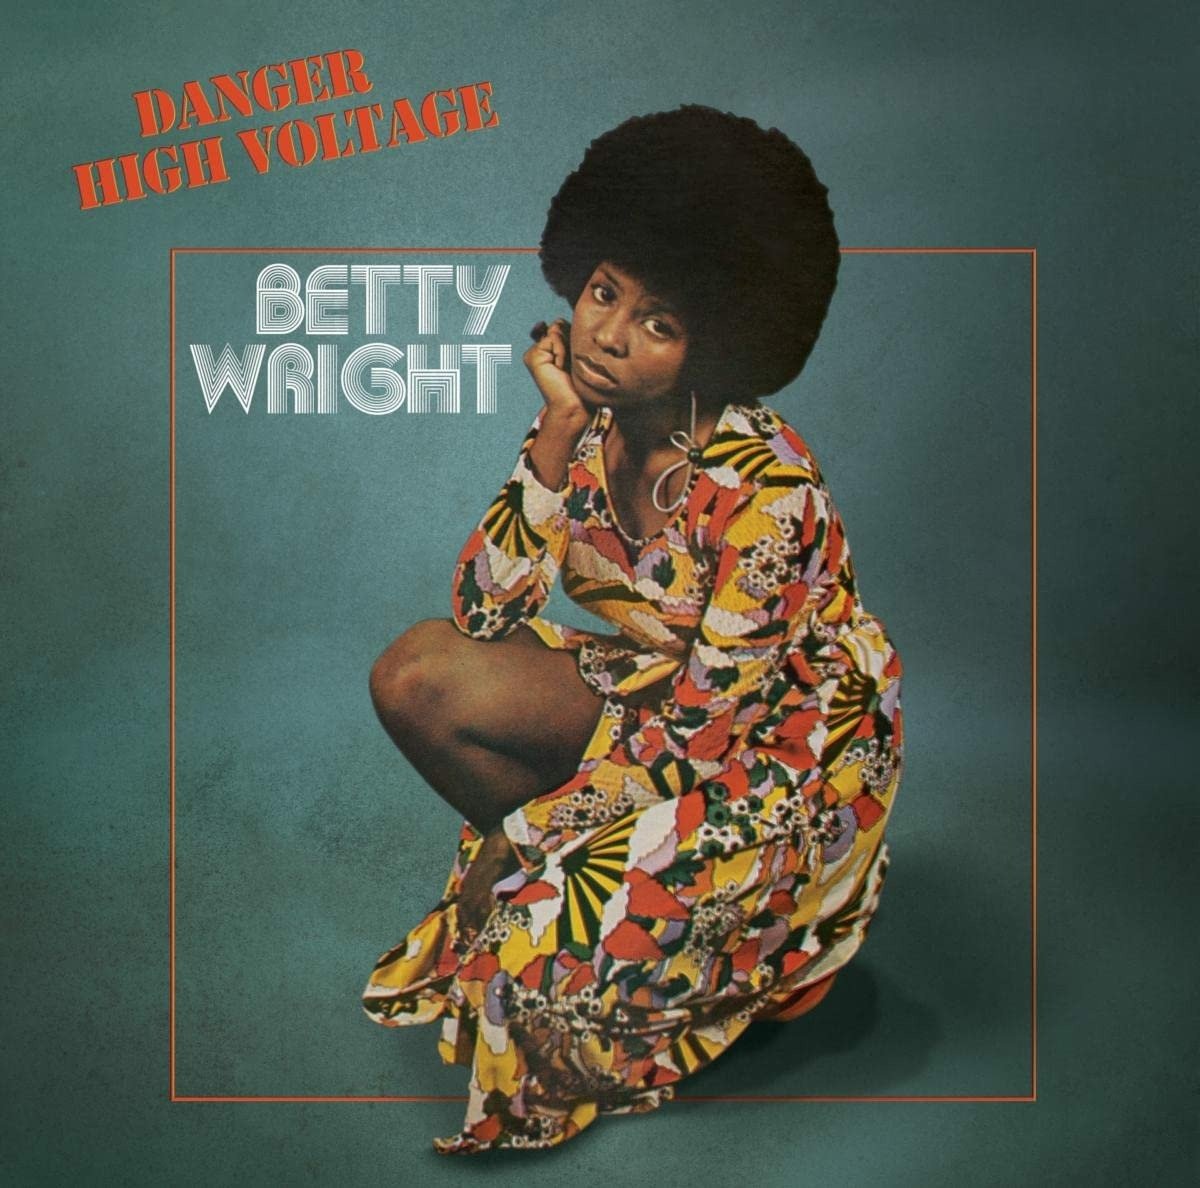 CD Shop - WRIGHT, BETTY DANGER HIGH VOLTAGE